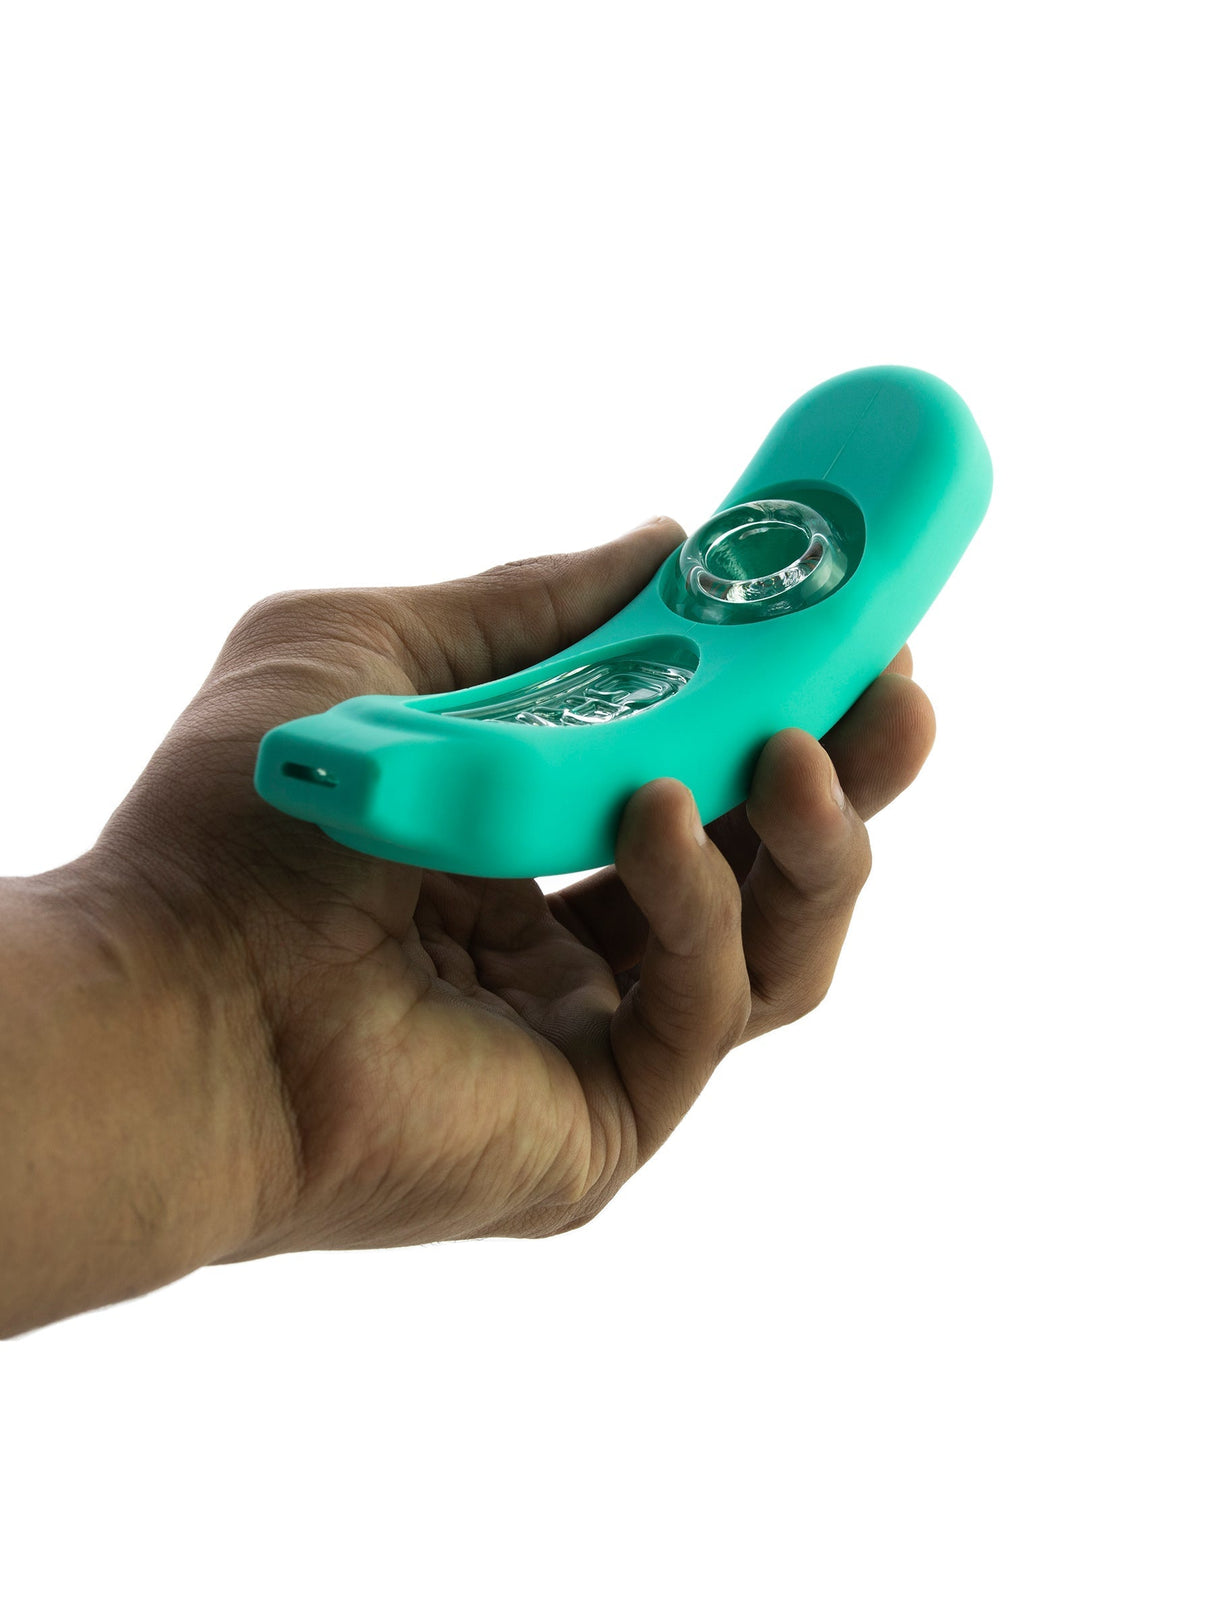 Teal GRAV Rocker Steamroller with Silicone Skin held in hand, showcasing durability and compact design